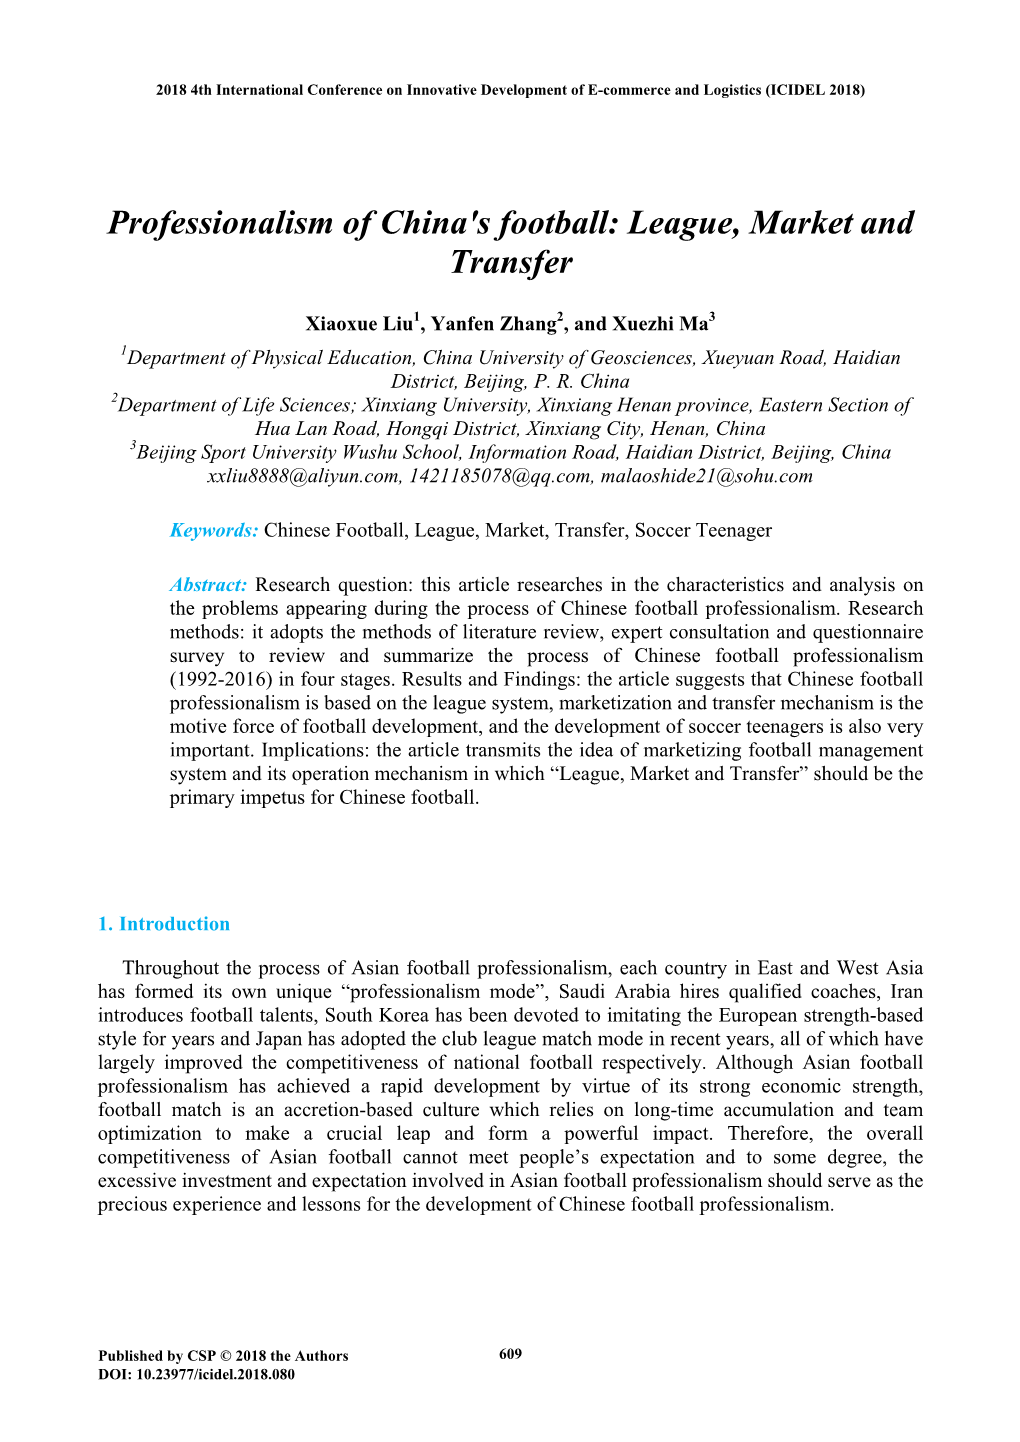 Professionalism of China's Football: League, Market and Transfer